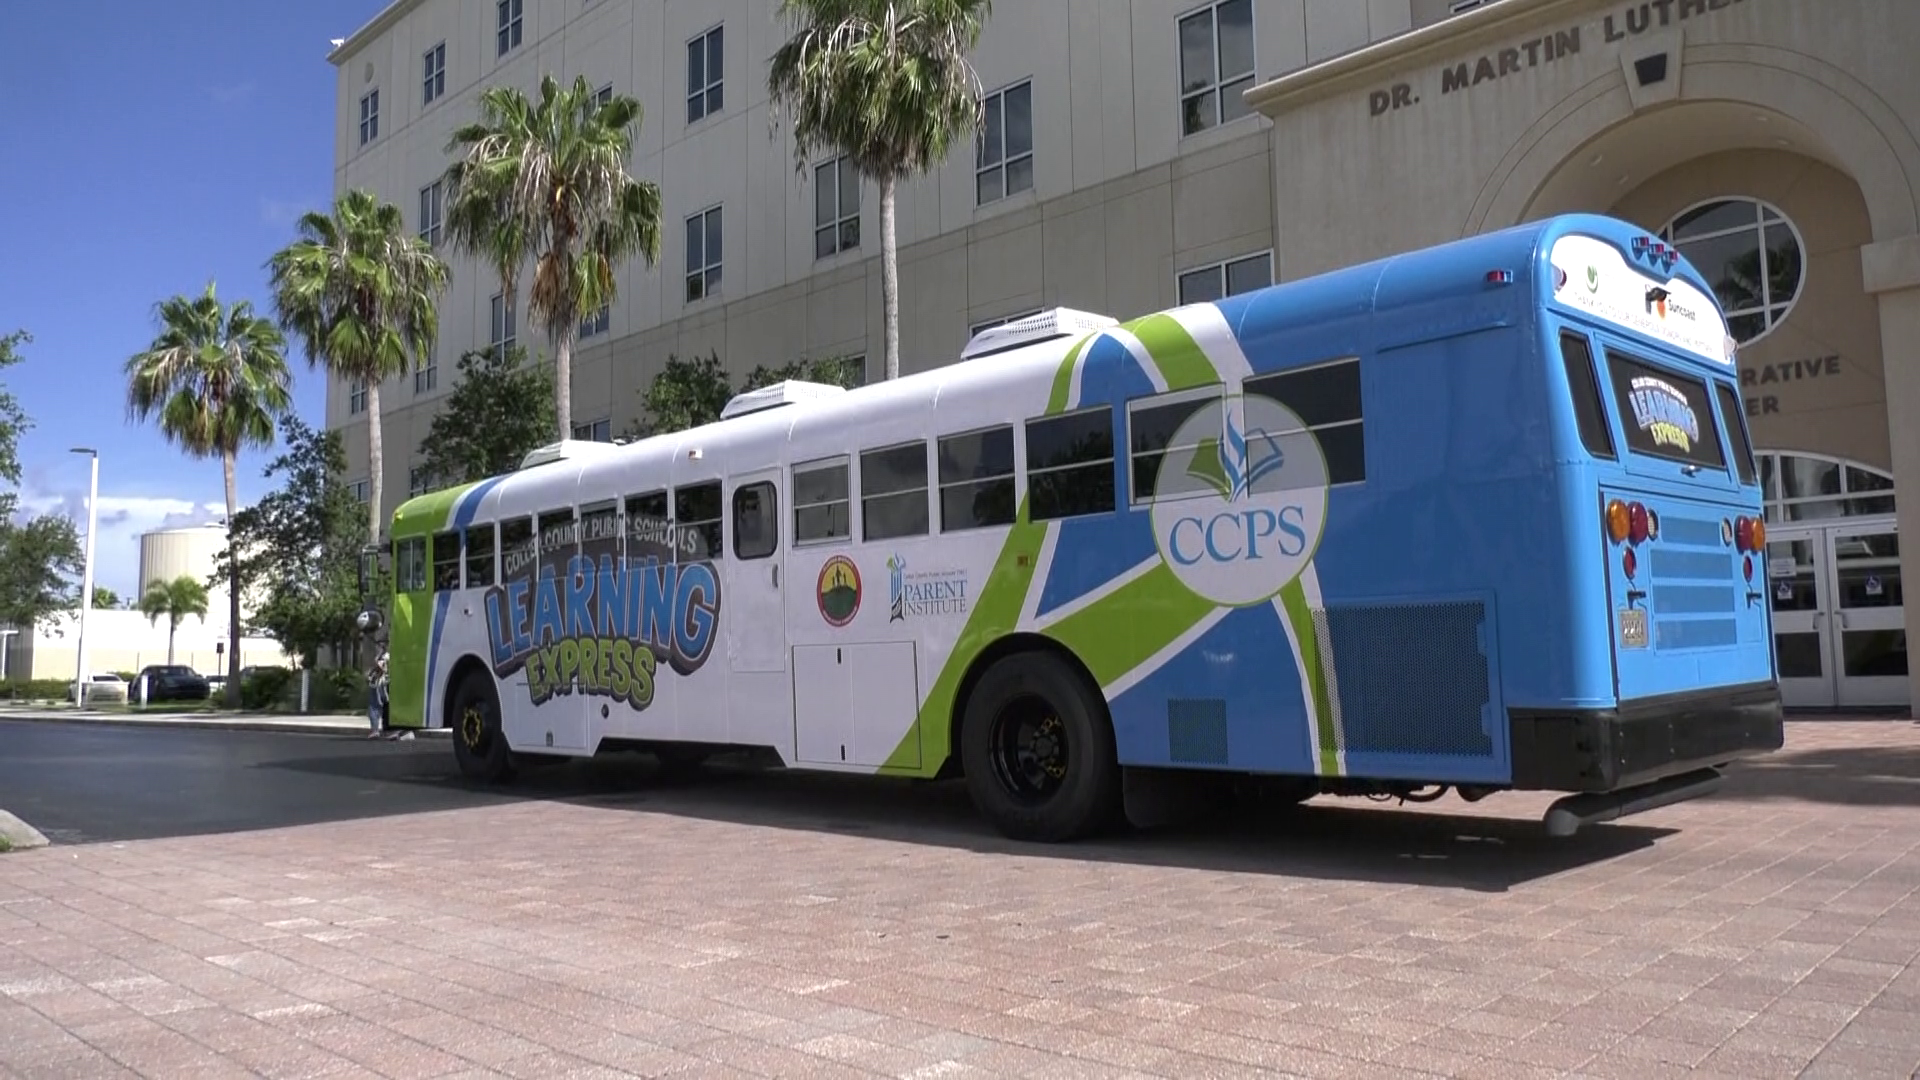 Just in time for school, Collier County is rolling out the Learning Express bus to enhance education for migrant students and their families.